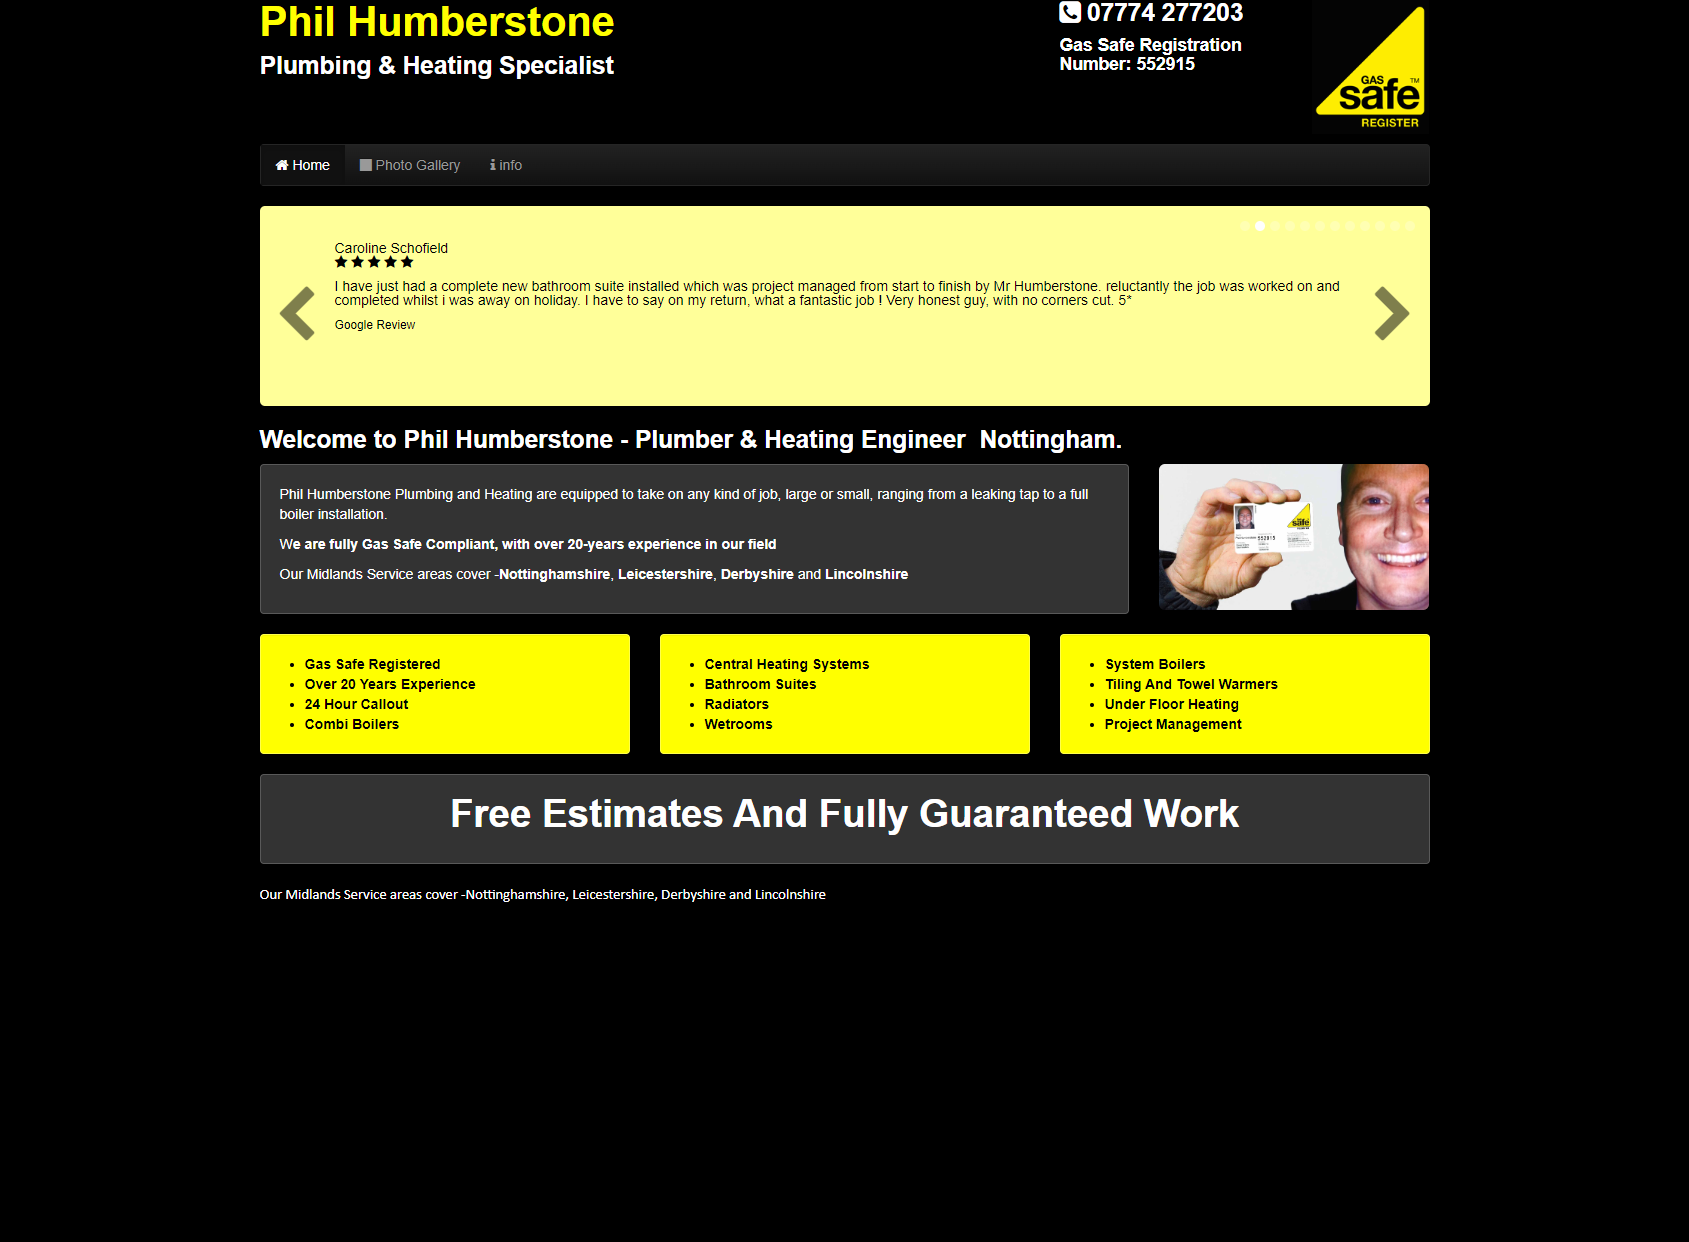 Phil Humberstone Plumbing And Heating Services